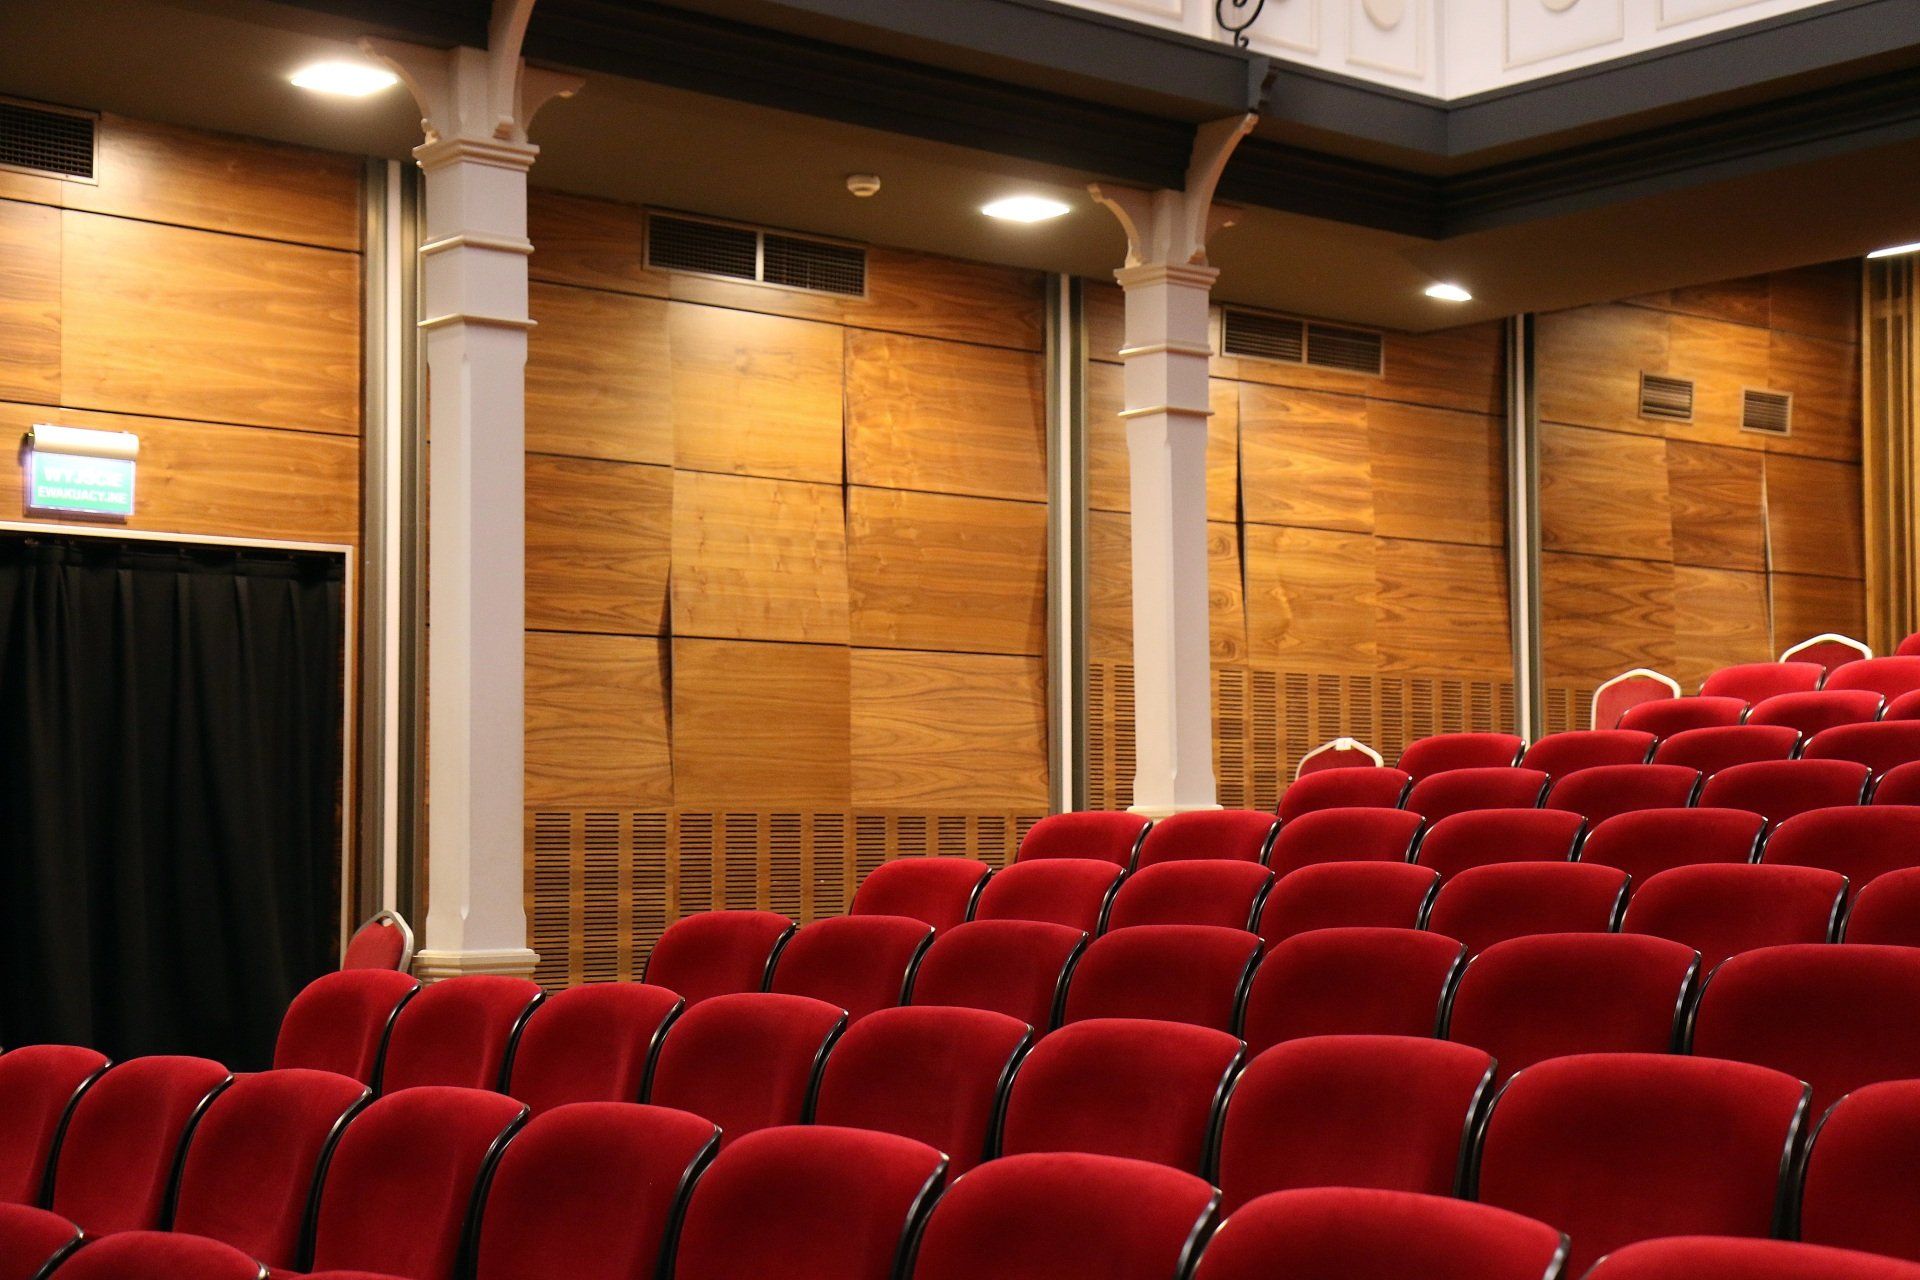 Rows of red seats in an auditorium with wooden walls